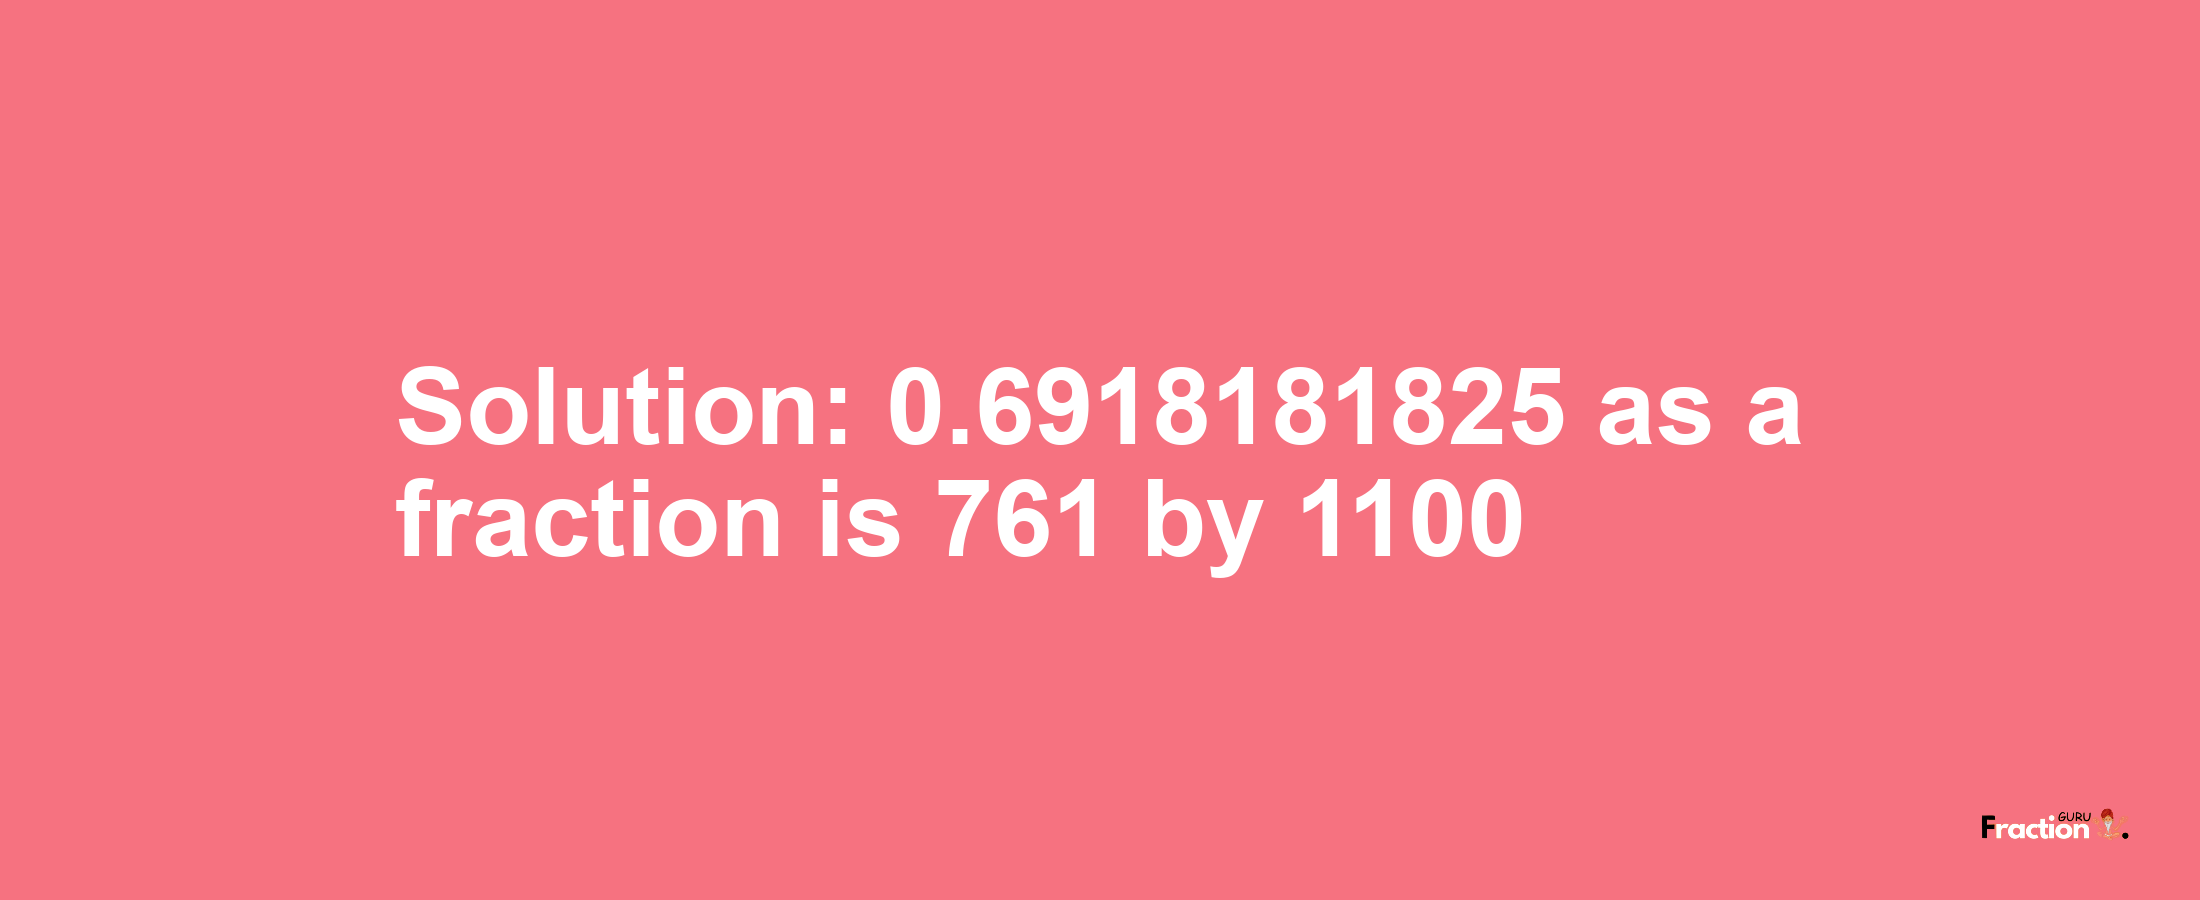 Solution:0.6918181825 as a fraction is 761/1100